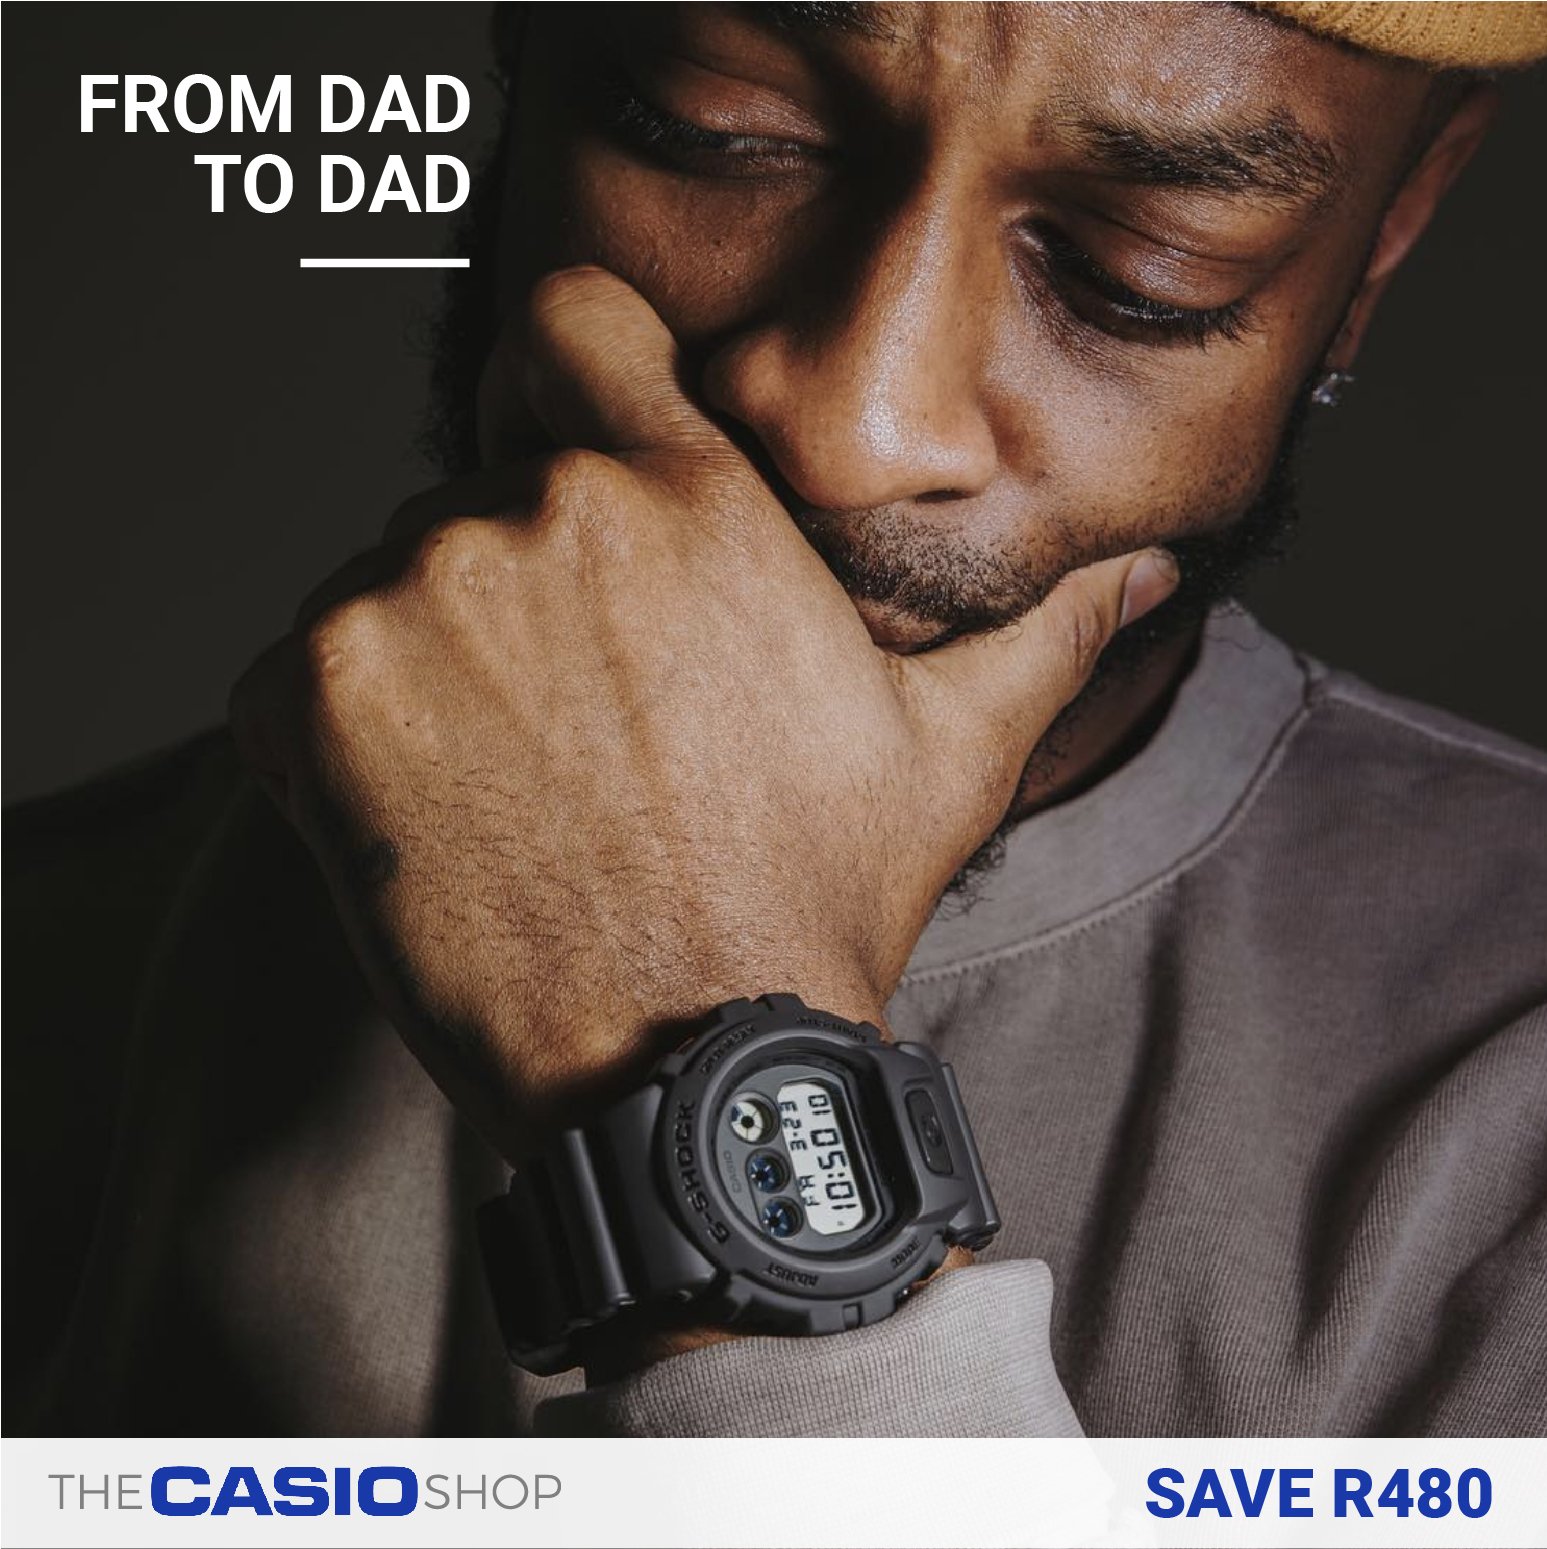 The Shop on Twitter: "Sometimes only #DADS know what they need. SAVE R480 on the DW-6900BBN-1DR. WAS R2,399 NOW R1,919. NOW - https://t.co/0kZ6xQxkoF https://t.co/gvTinqyFWB" / Twitter